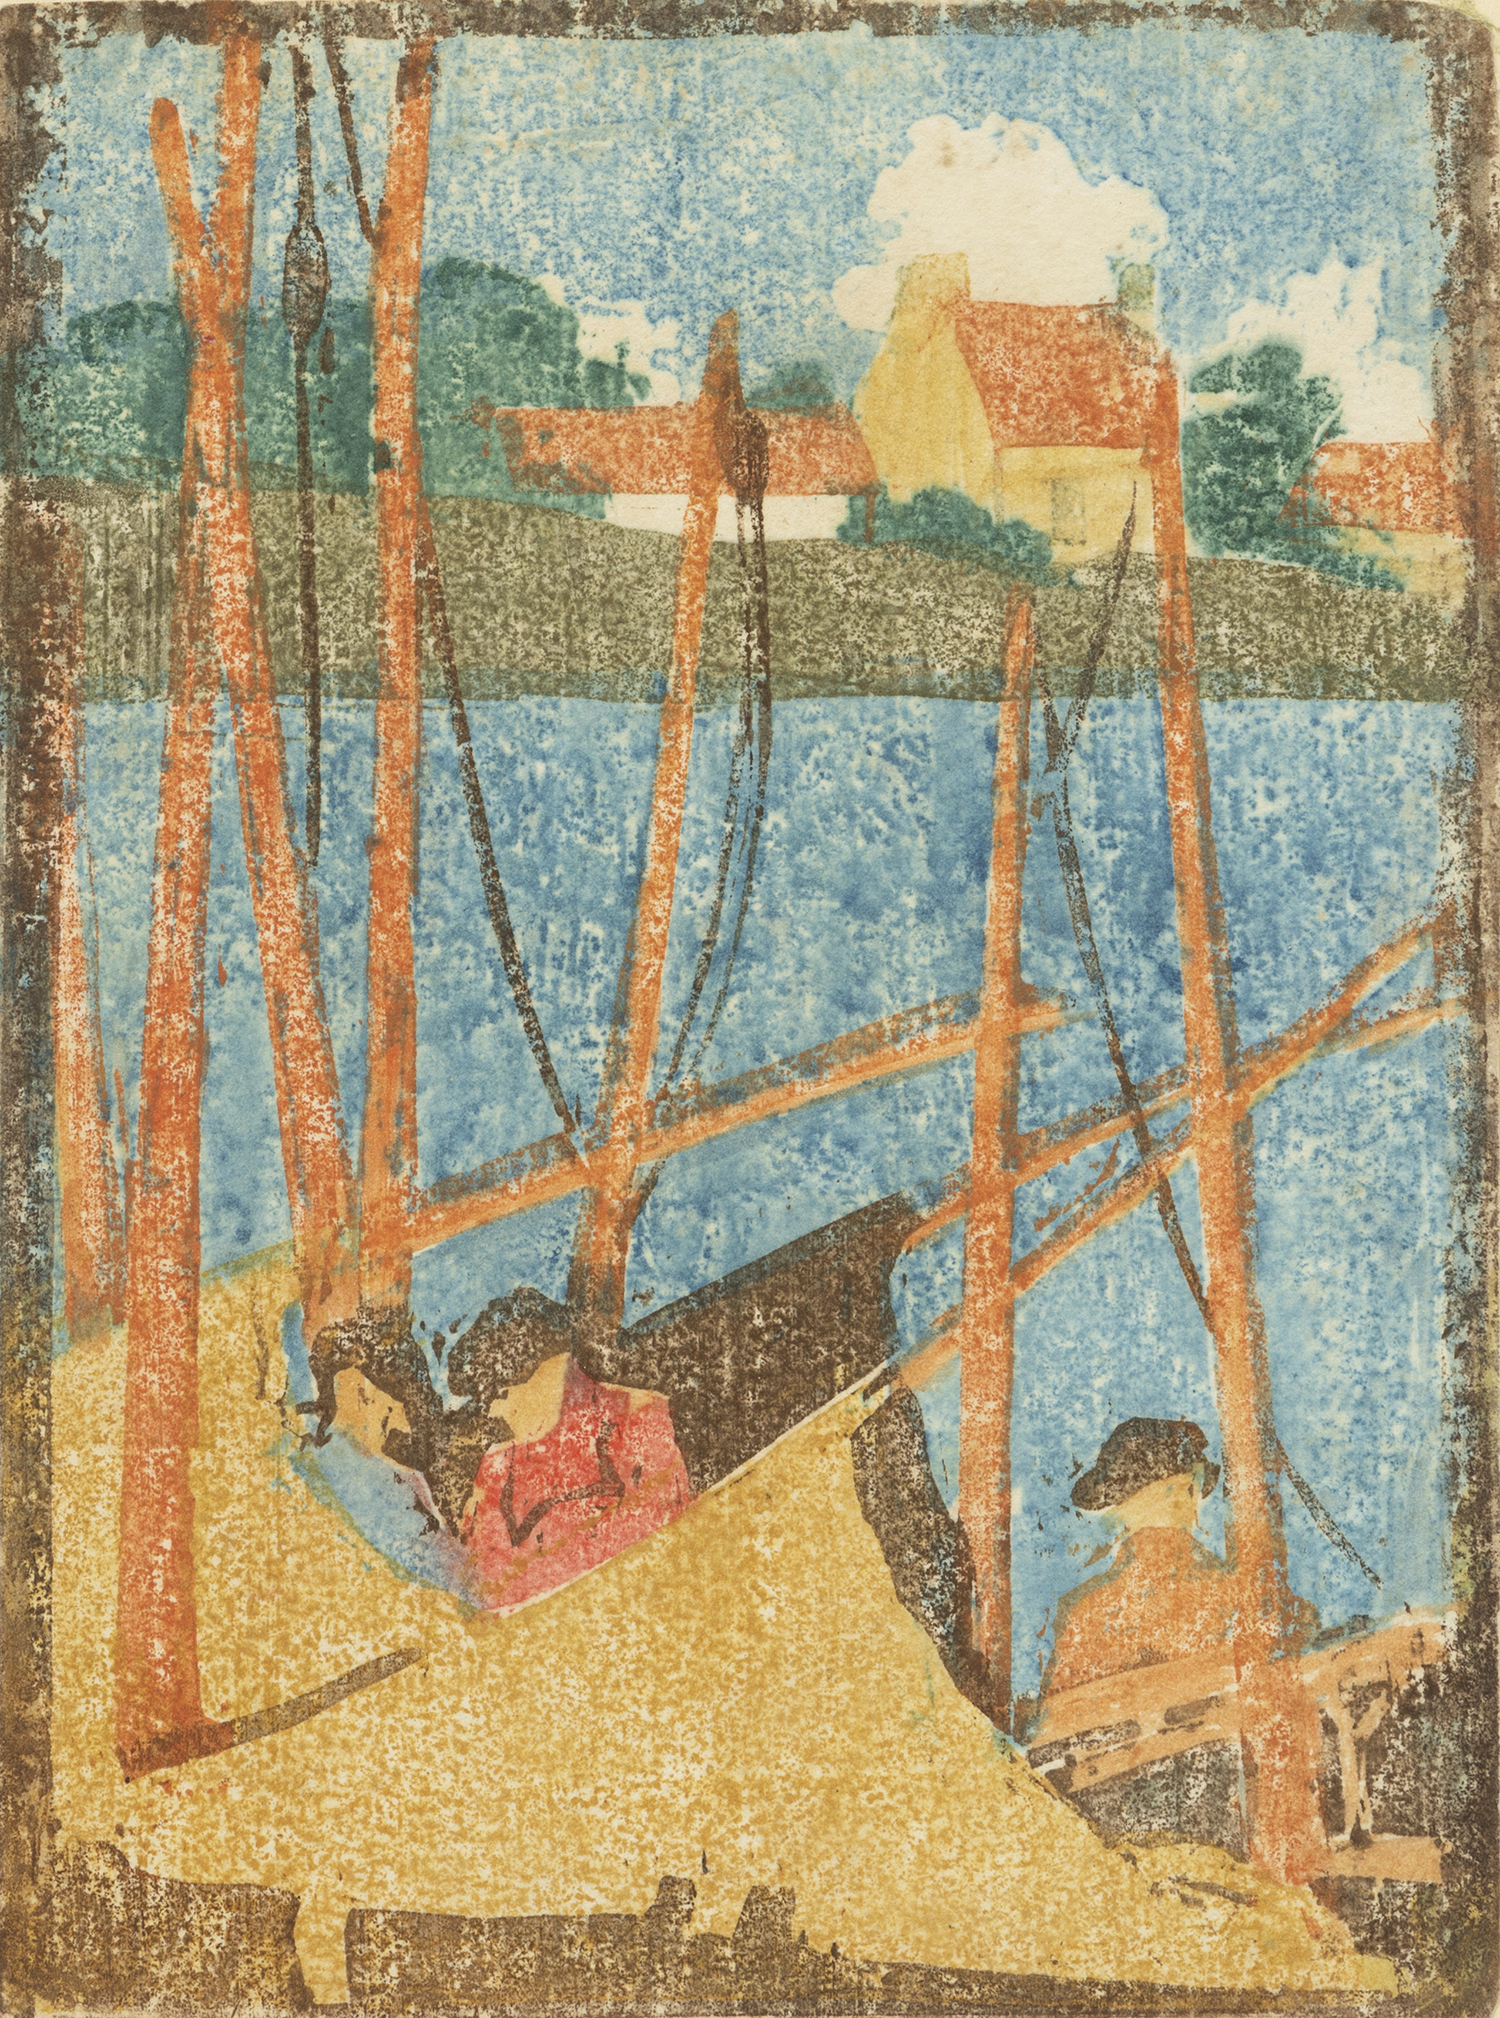 Untitled (mending sail-cloths), 1900-12, Color woodcut, 8 x 5 3/4 inches (20.3 x 14.6 cm), Edition size unknown, rare